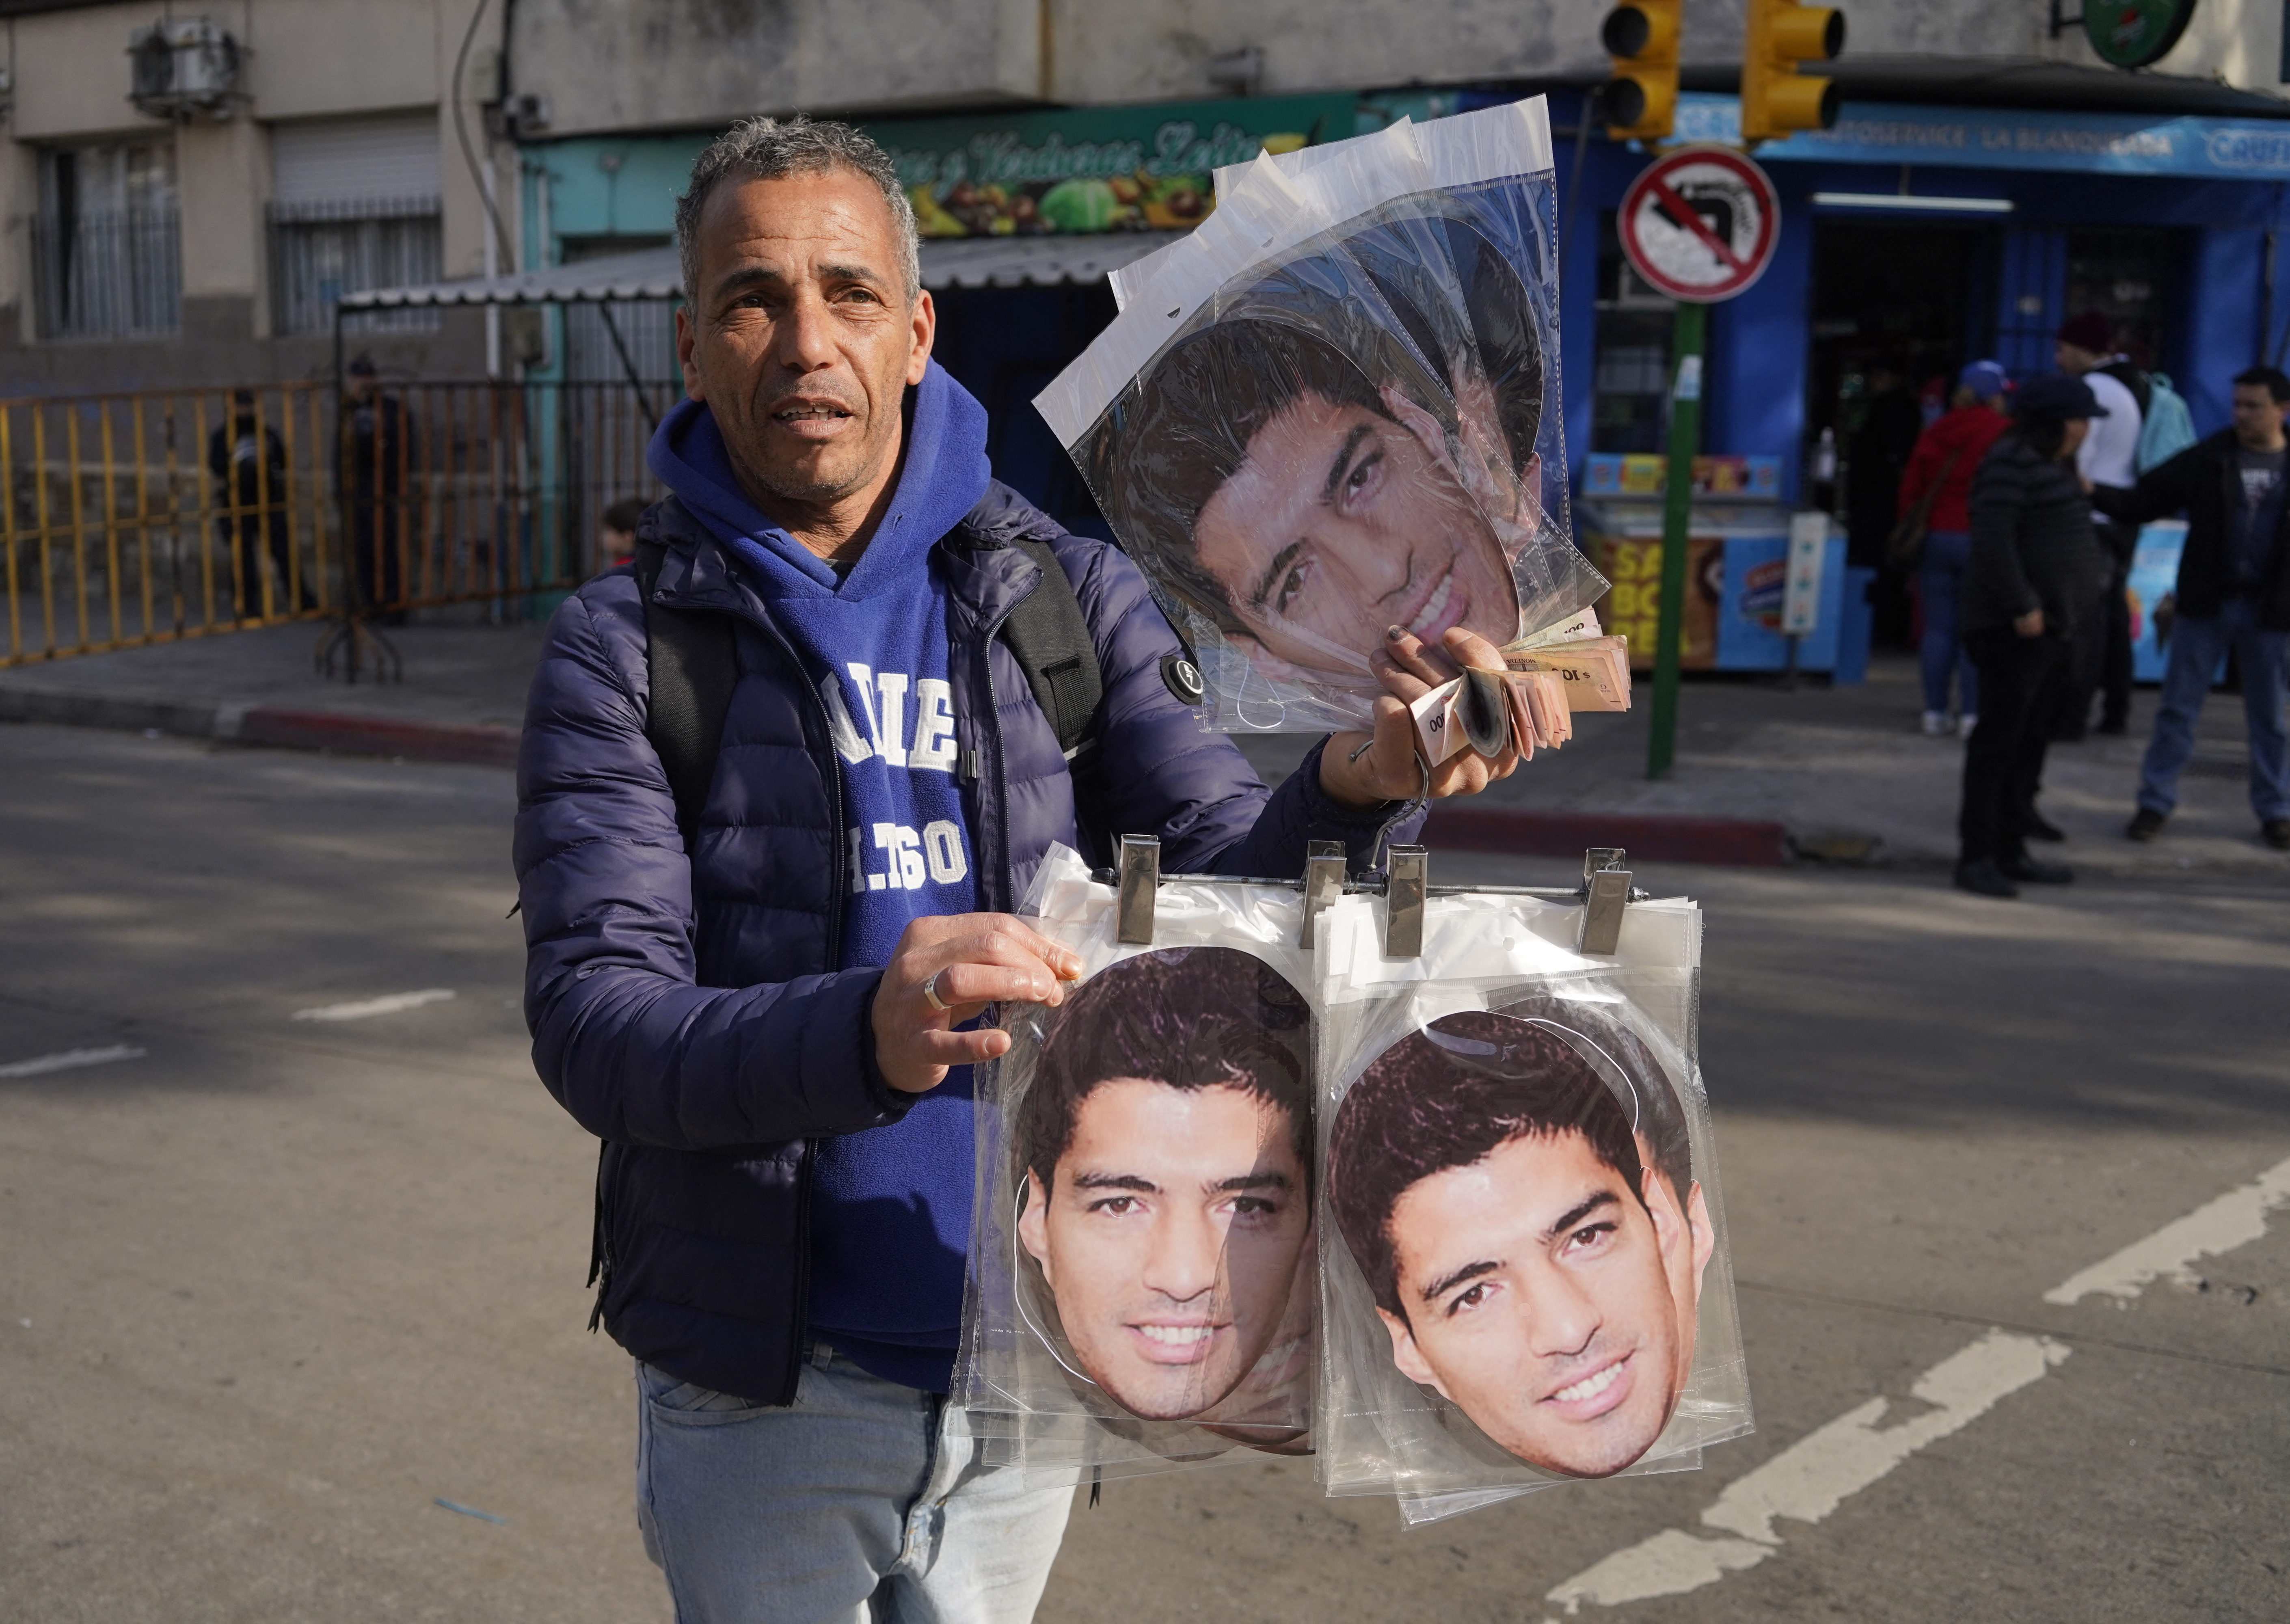 The sale of Suárez masks, a big business in Montevideo (REUTERS / Andres Cuenca Olaondo)